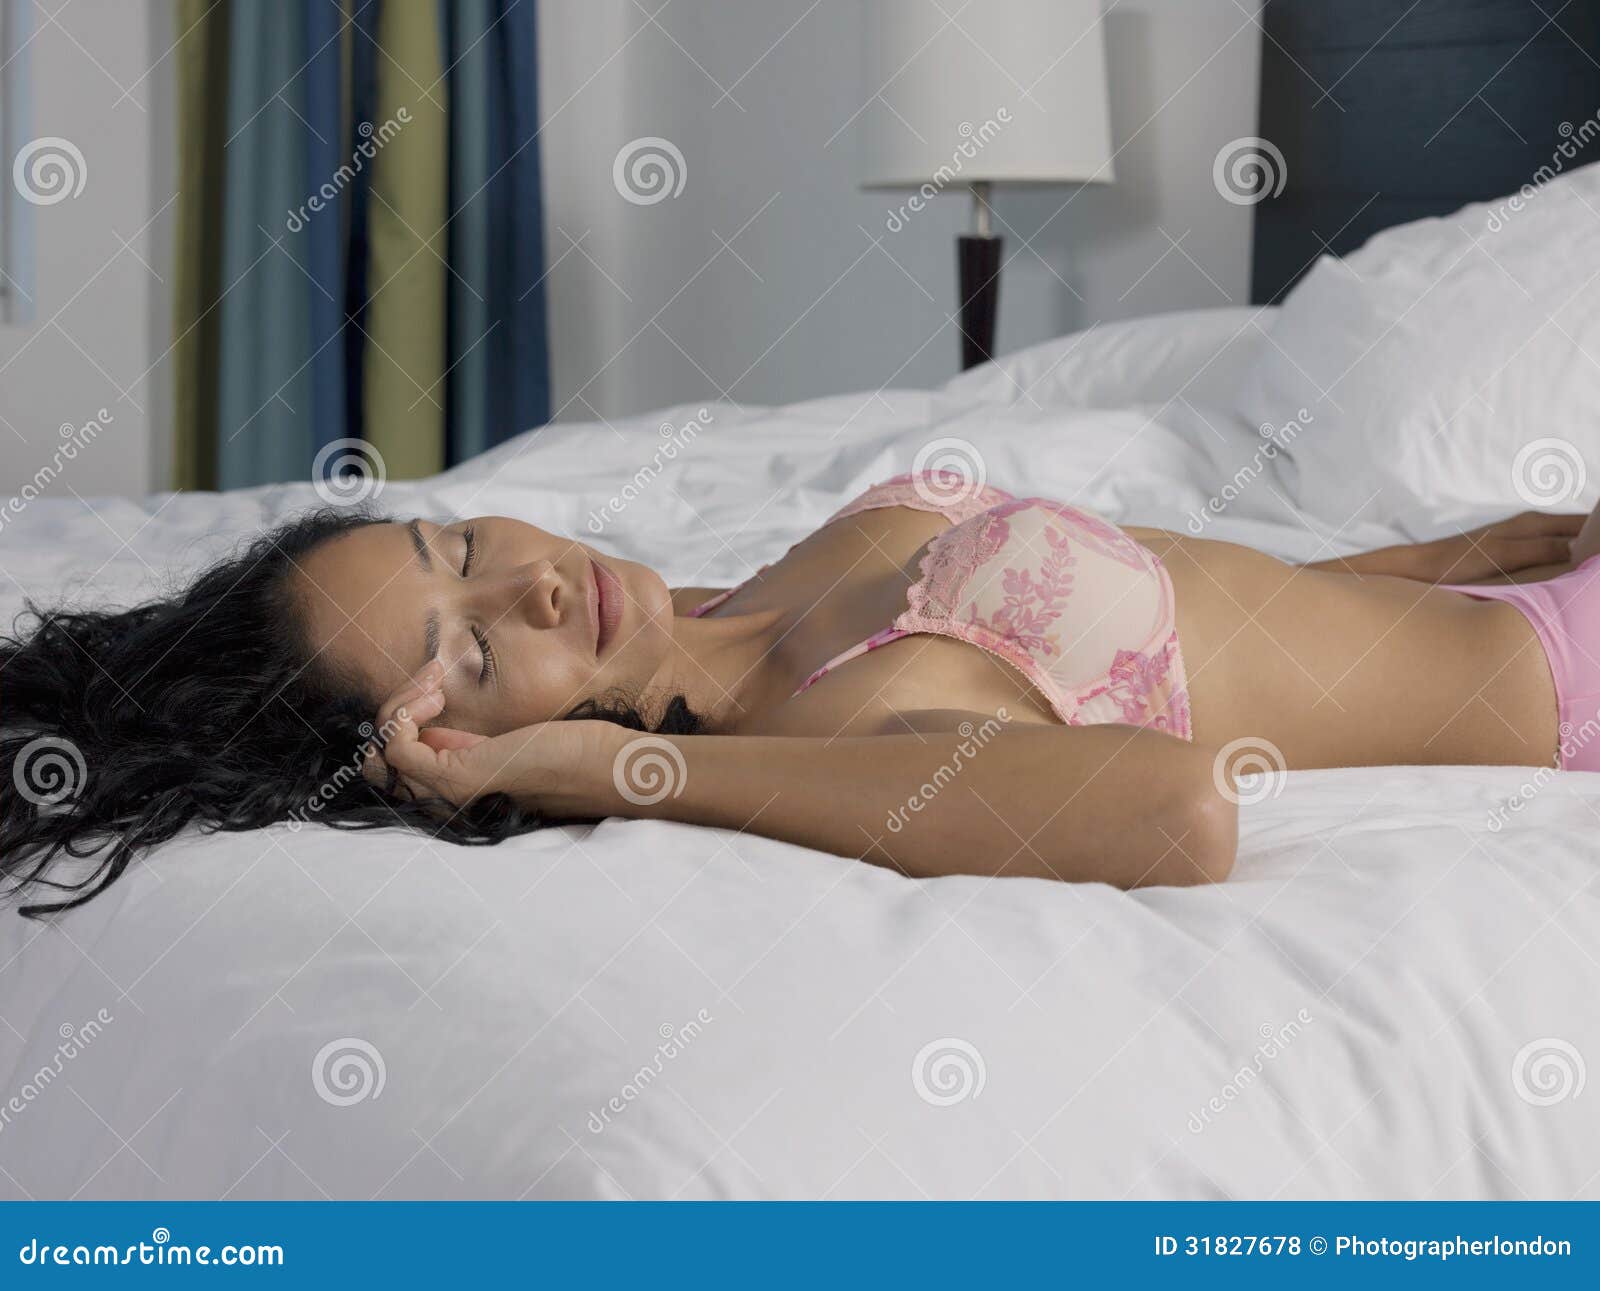 Woman in Lingerie Sleeping on Bed Stock Photo - Image of room, person:  31827678